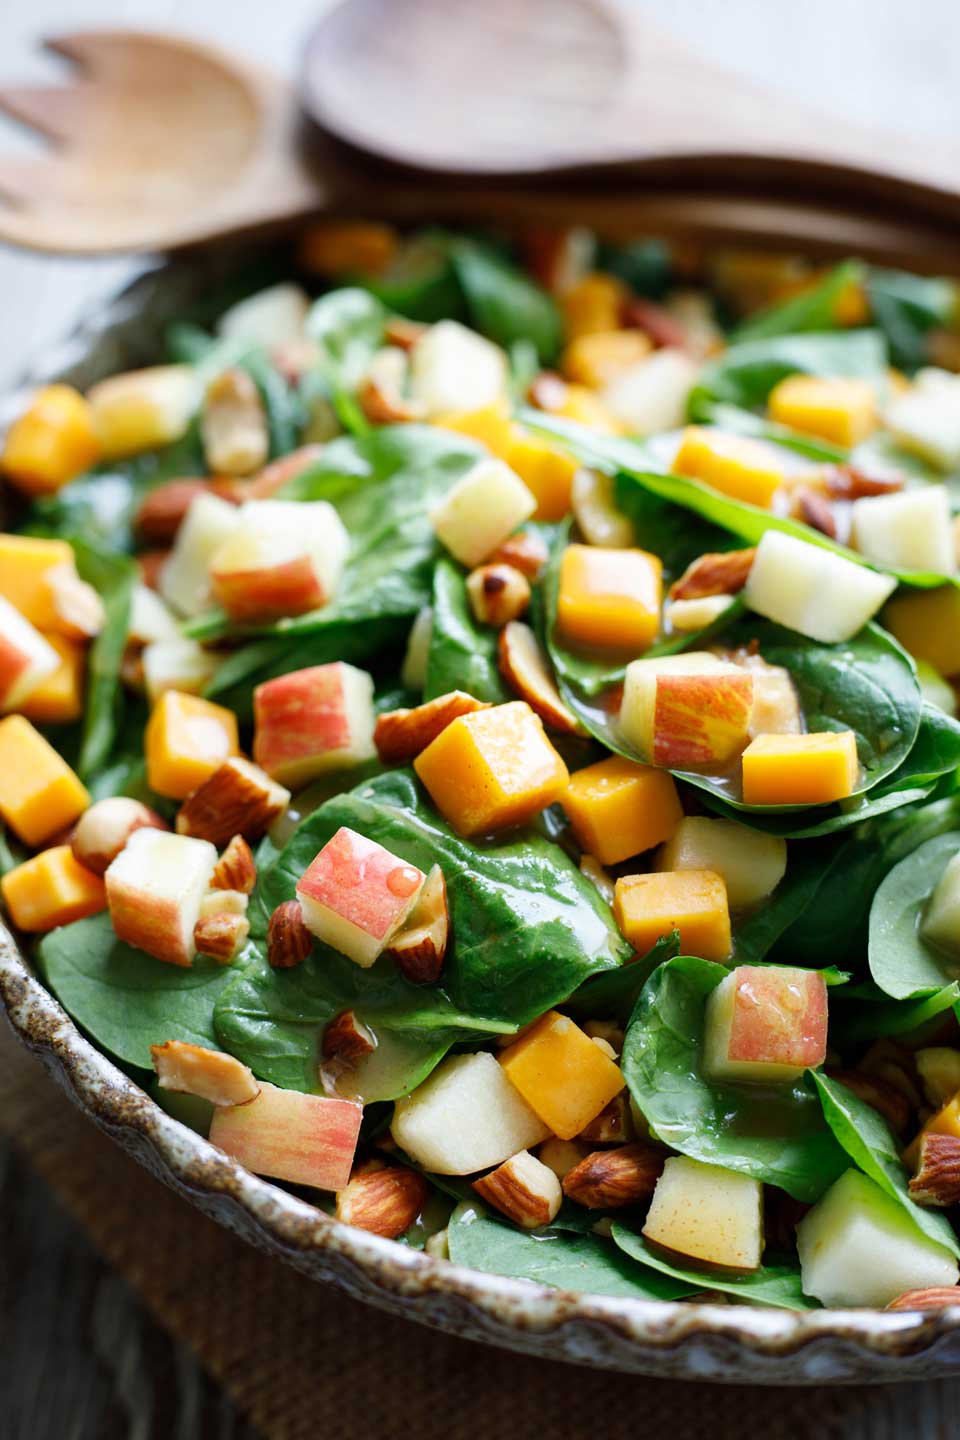 Best Thanksgiving Side Dish Recipes: Spinach Salad with Apples, Cheddar and Smoked Almonds from Two Healthy Kitchens